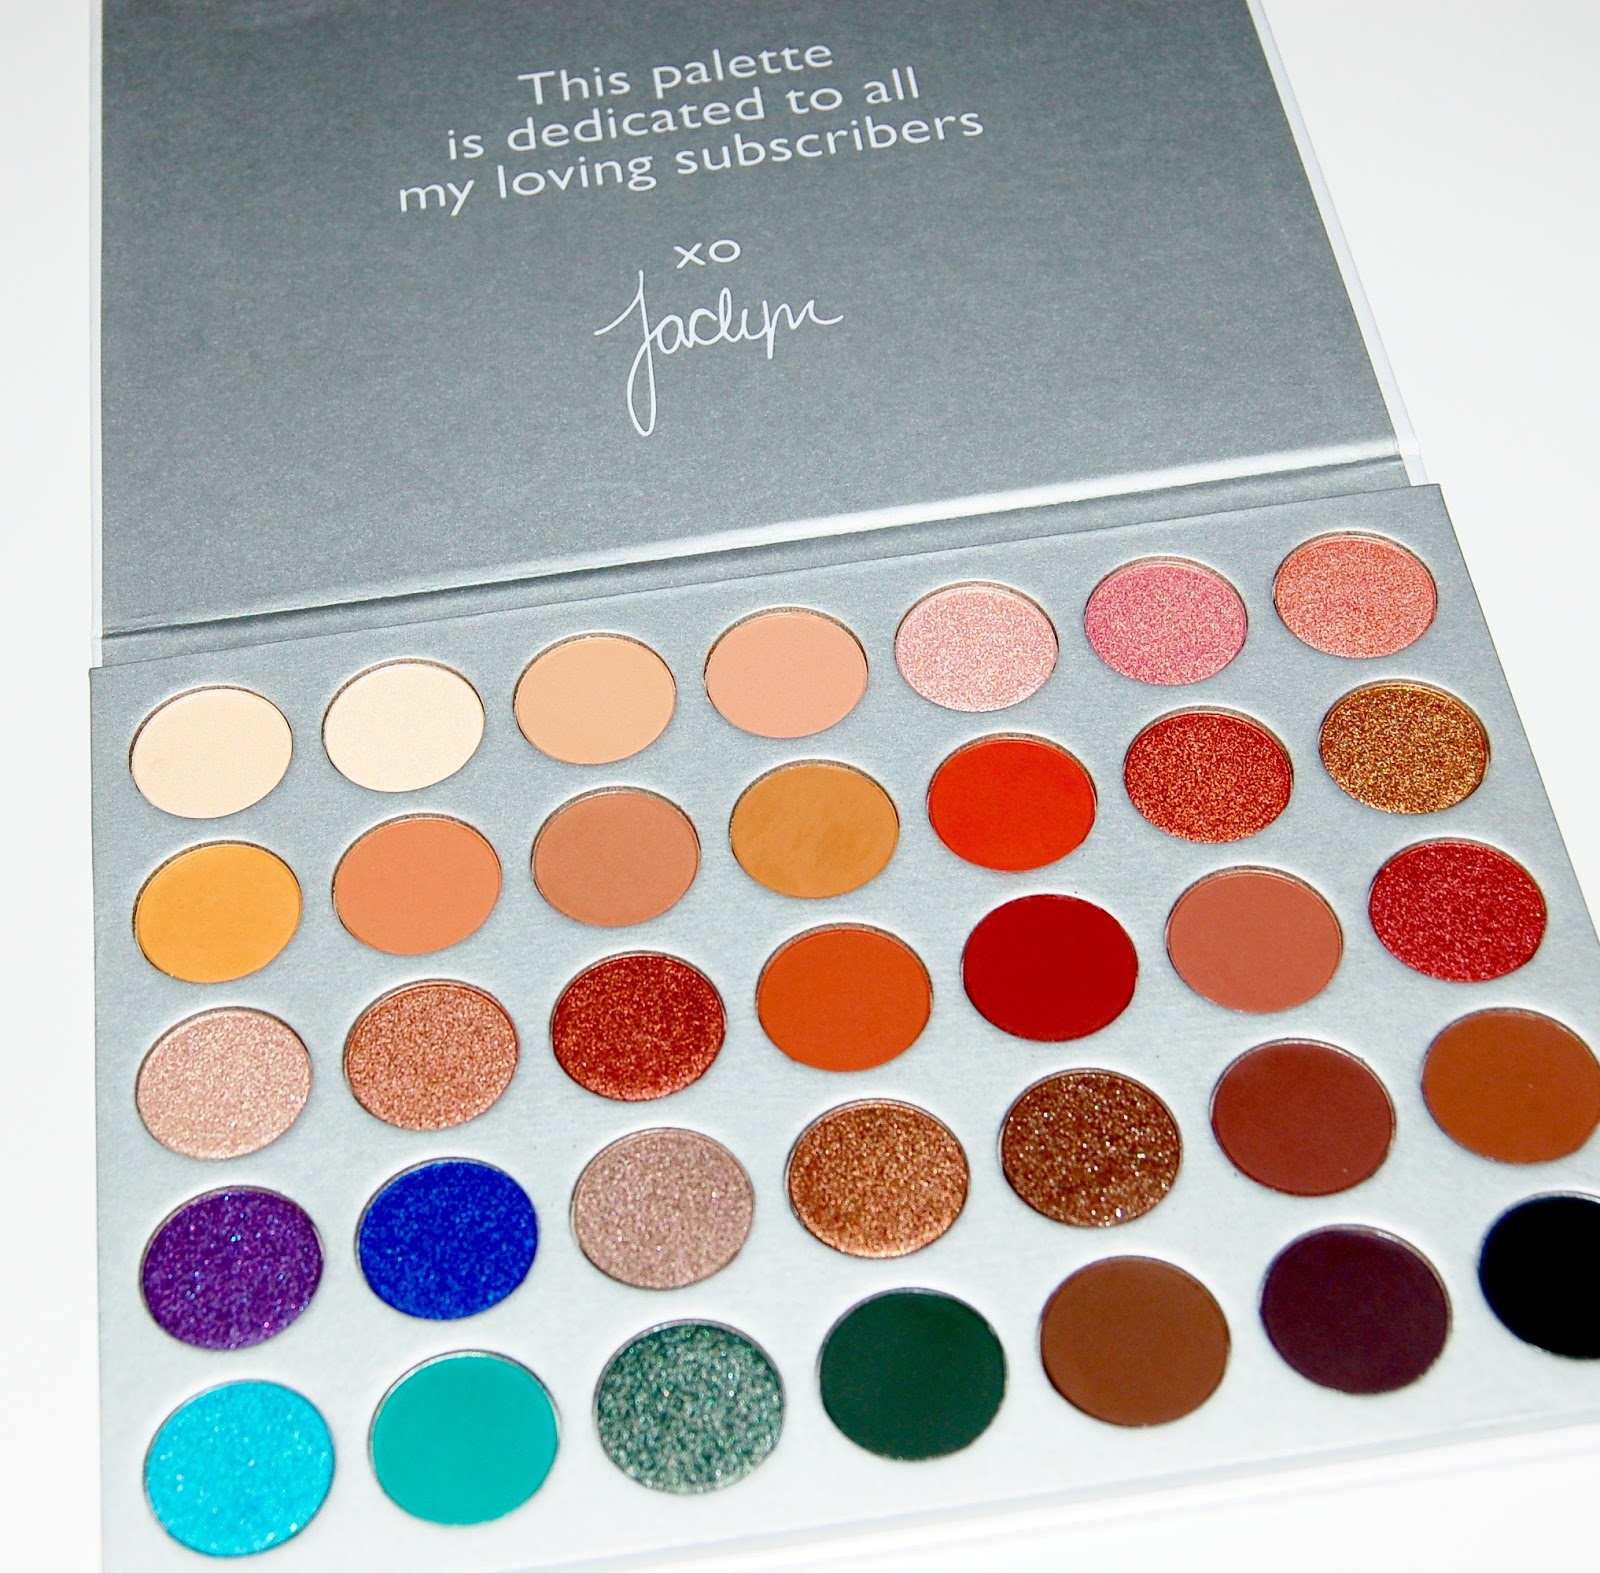 Morphe X Jaclyn Hill Eyeshadow Palette Review | Hot Sex Picture